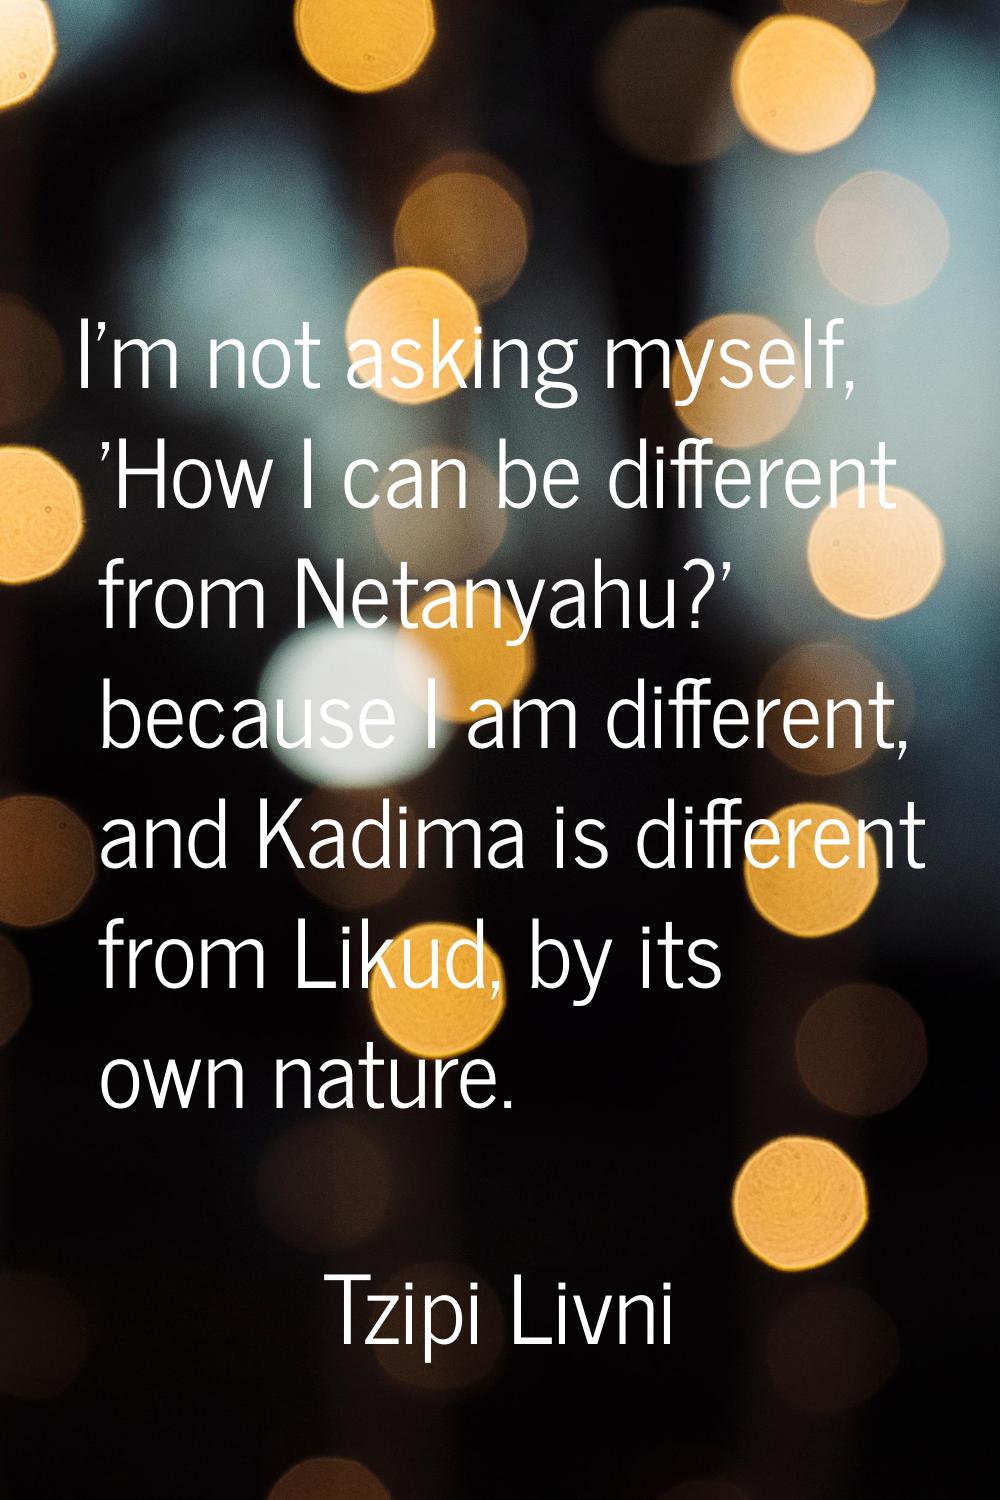 I'm not asking myself, 'How I can be different from Netanyahu?' because I am different, and Kadima 